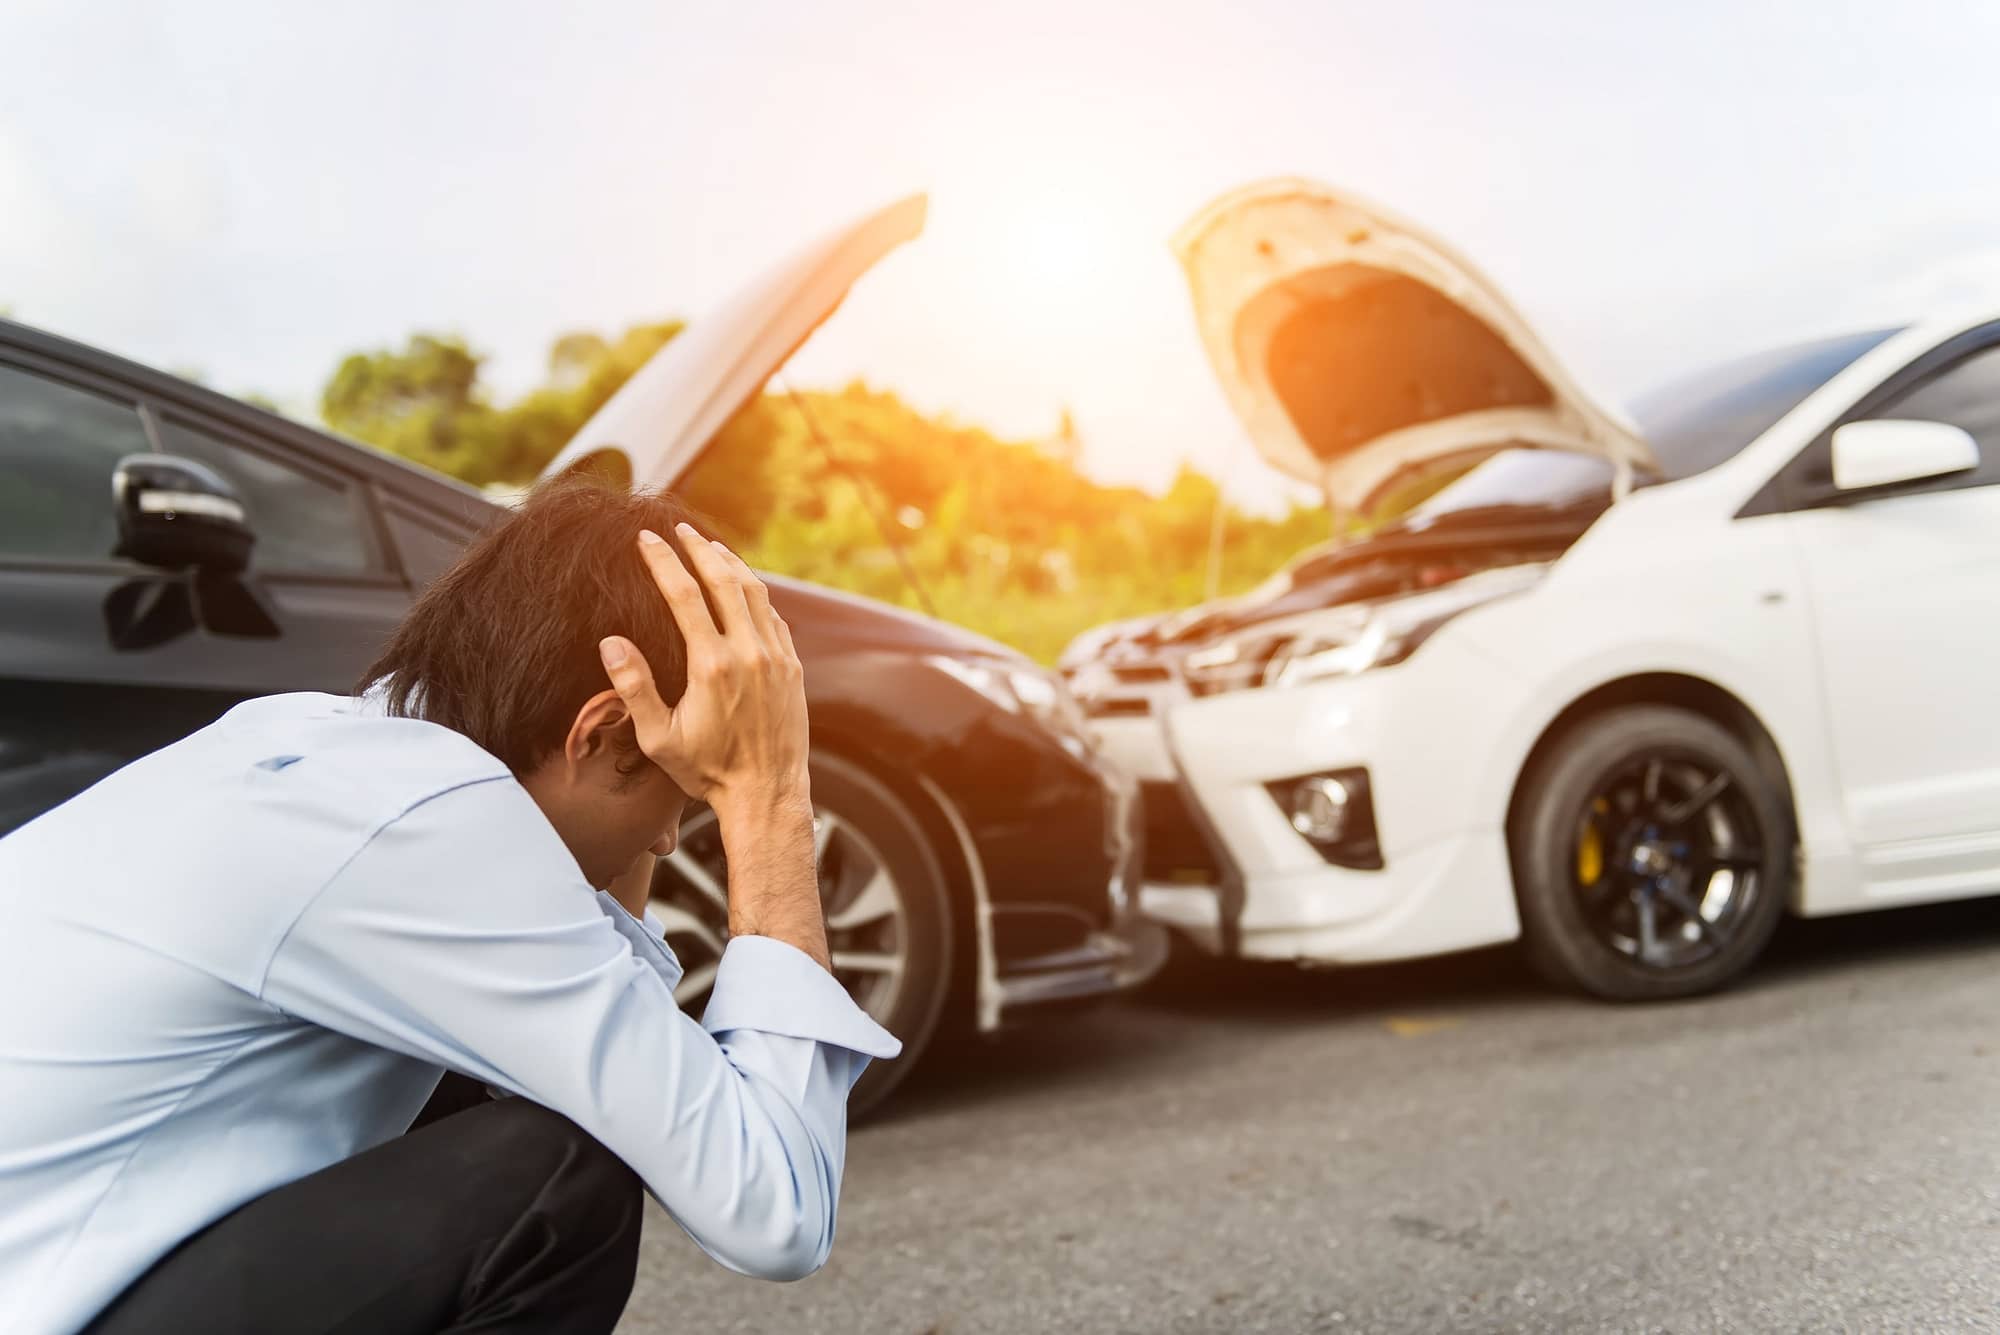 get an attorney after a car accident. Compensation